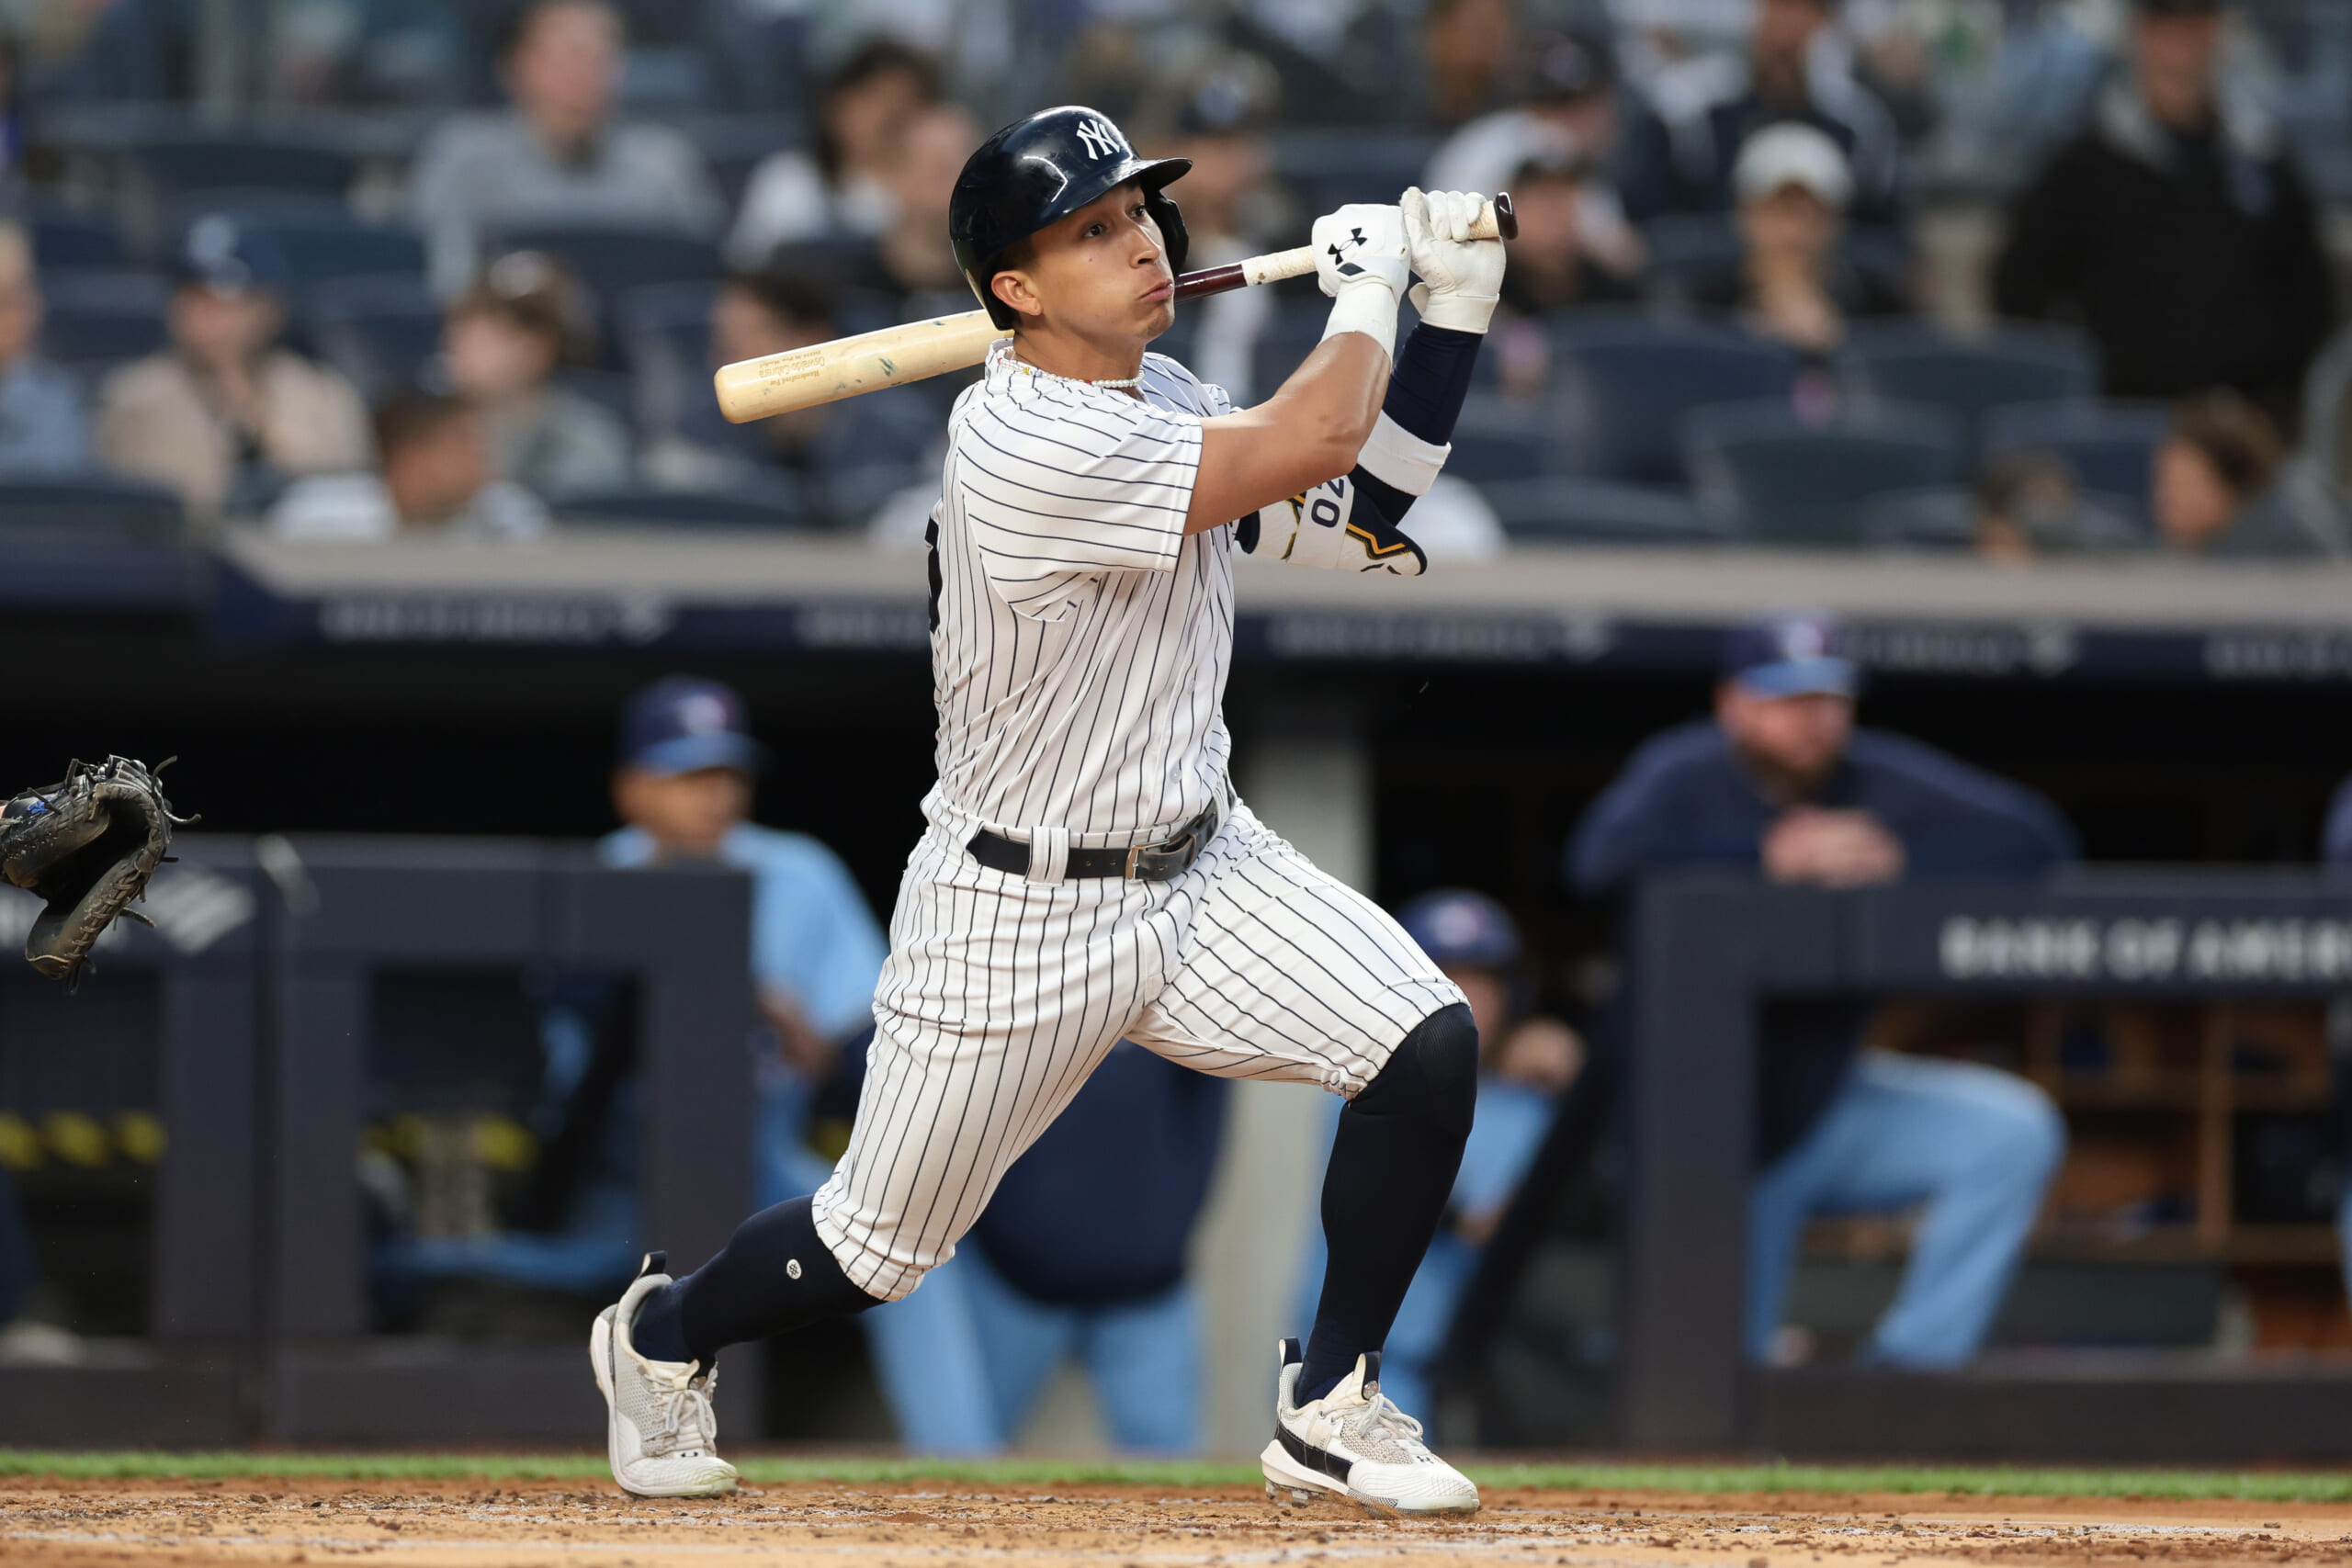 Why Is Yankees' Oswaldo Cabrera Struggling To Find Form?